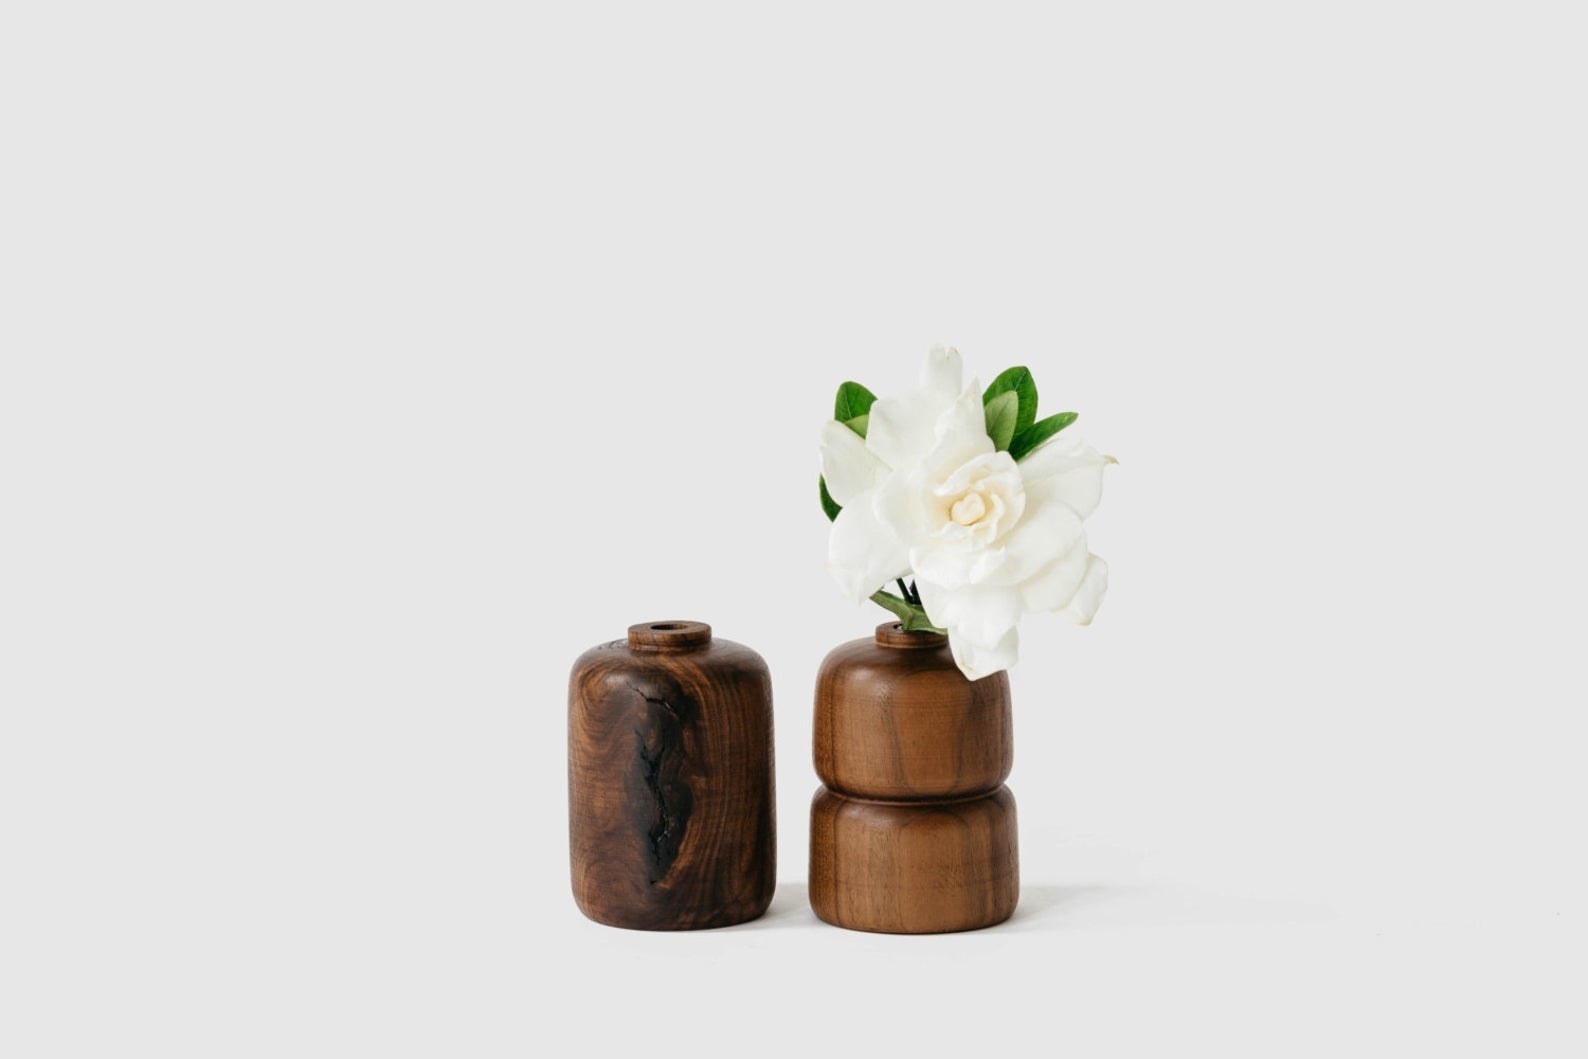 the two vases